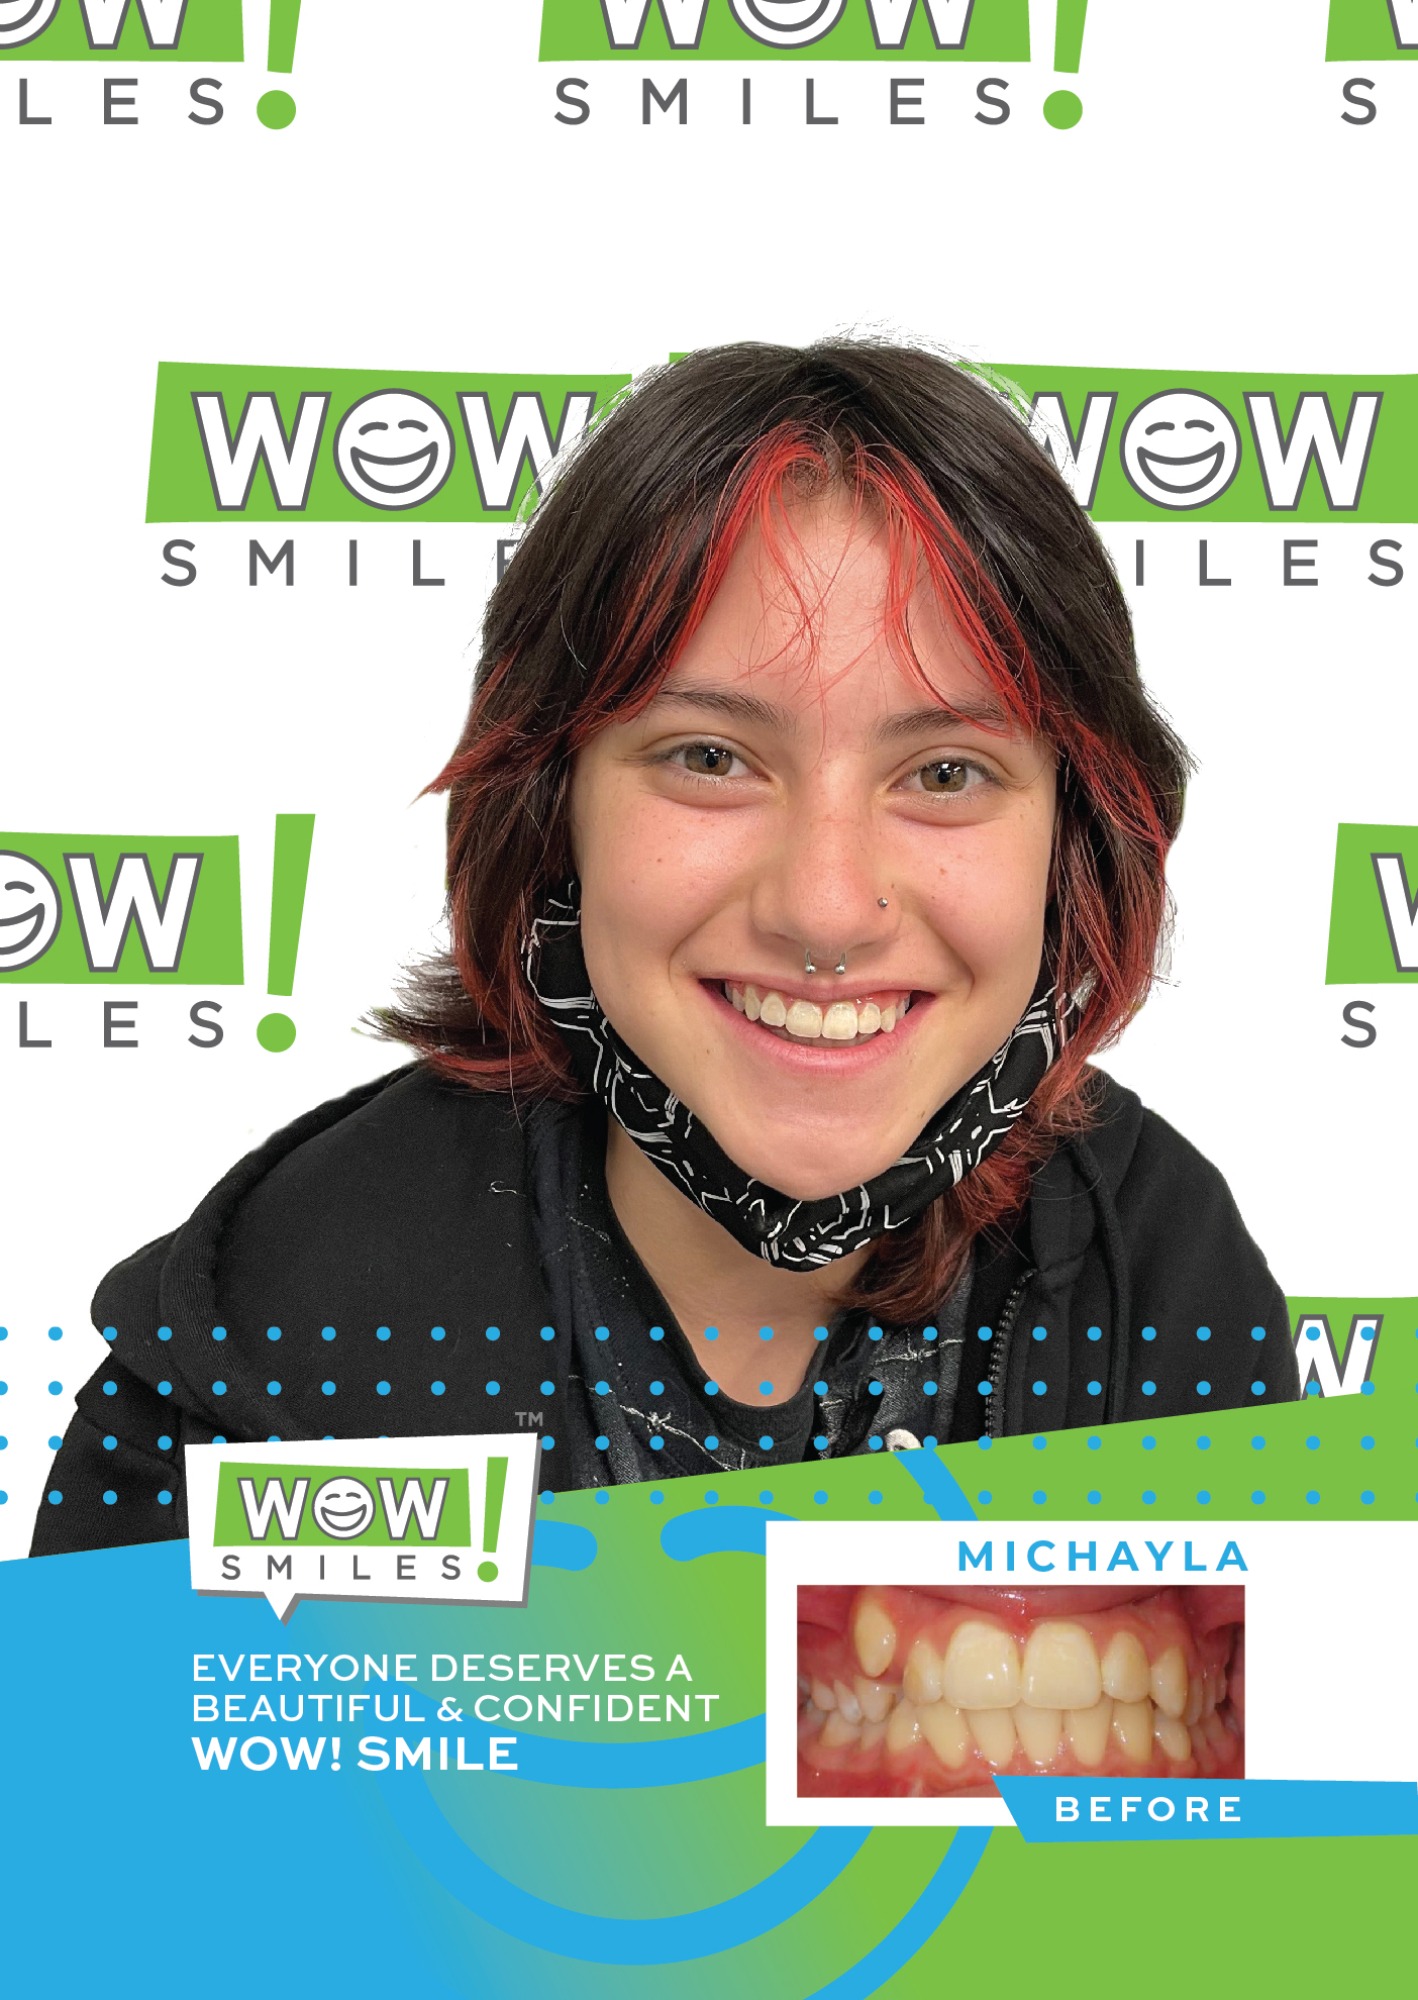 2022-07-20_Wow Smiles_Before and After Posters_Michayla_CC-01